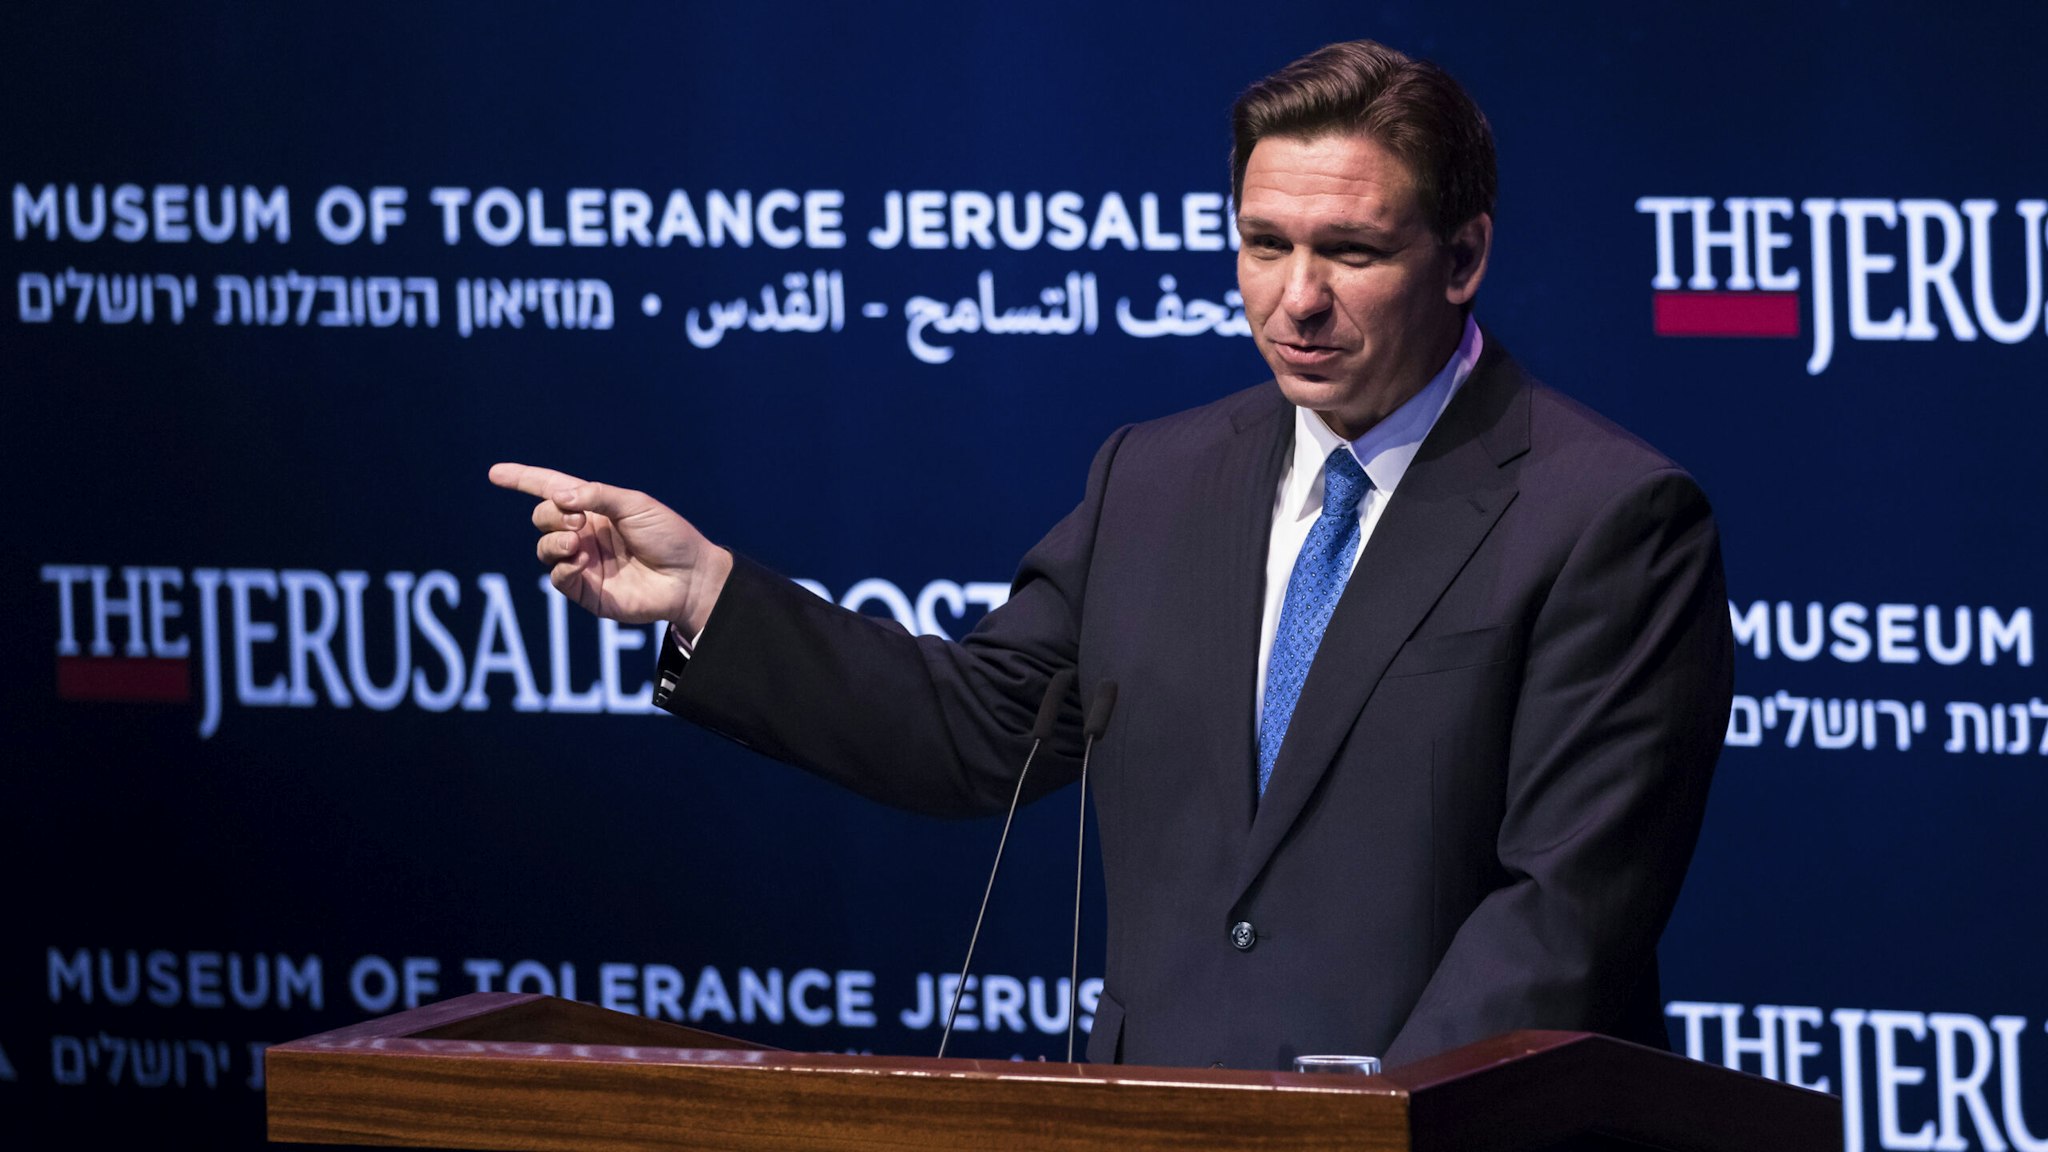 JERUSALEM, ISRAEL - APRIL 27: Florida Gov. Ron DeSantis gives a speech during the Jerusalem Post conference at the Museum of Tolerance on April 27, 2023 in Jerusalem, Israel. Ron DeSantis, the Republican governor of Florida and an anticipated US presidential candidate, has been visiting several countries as part of a trade delegation.